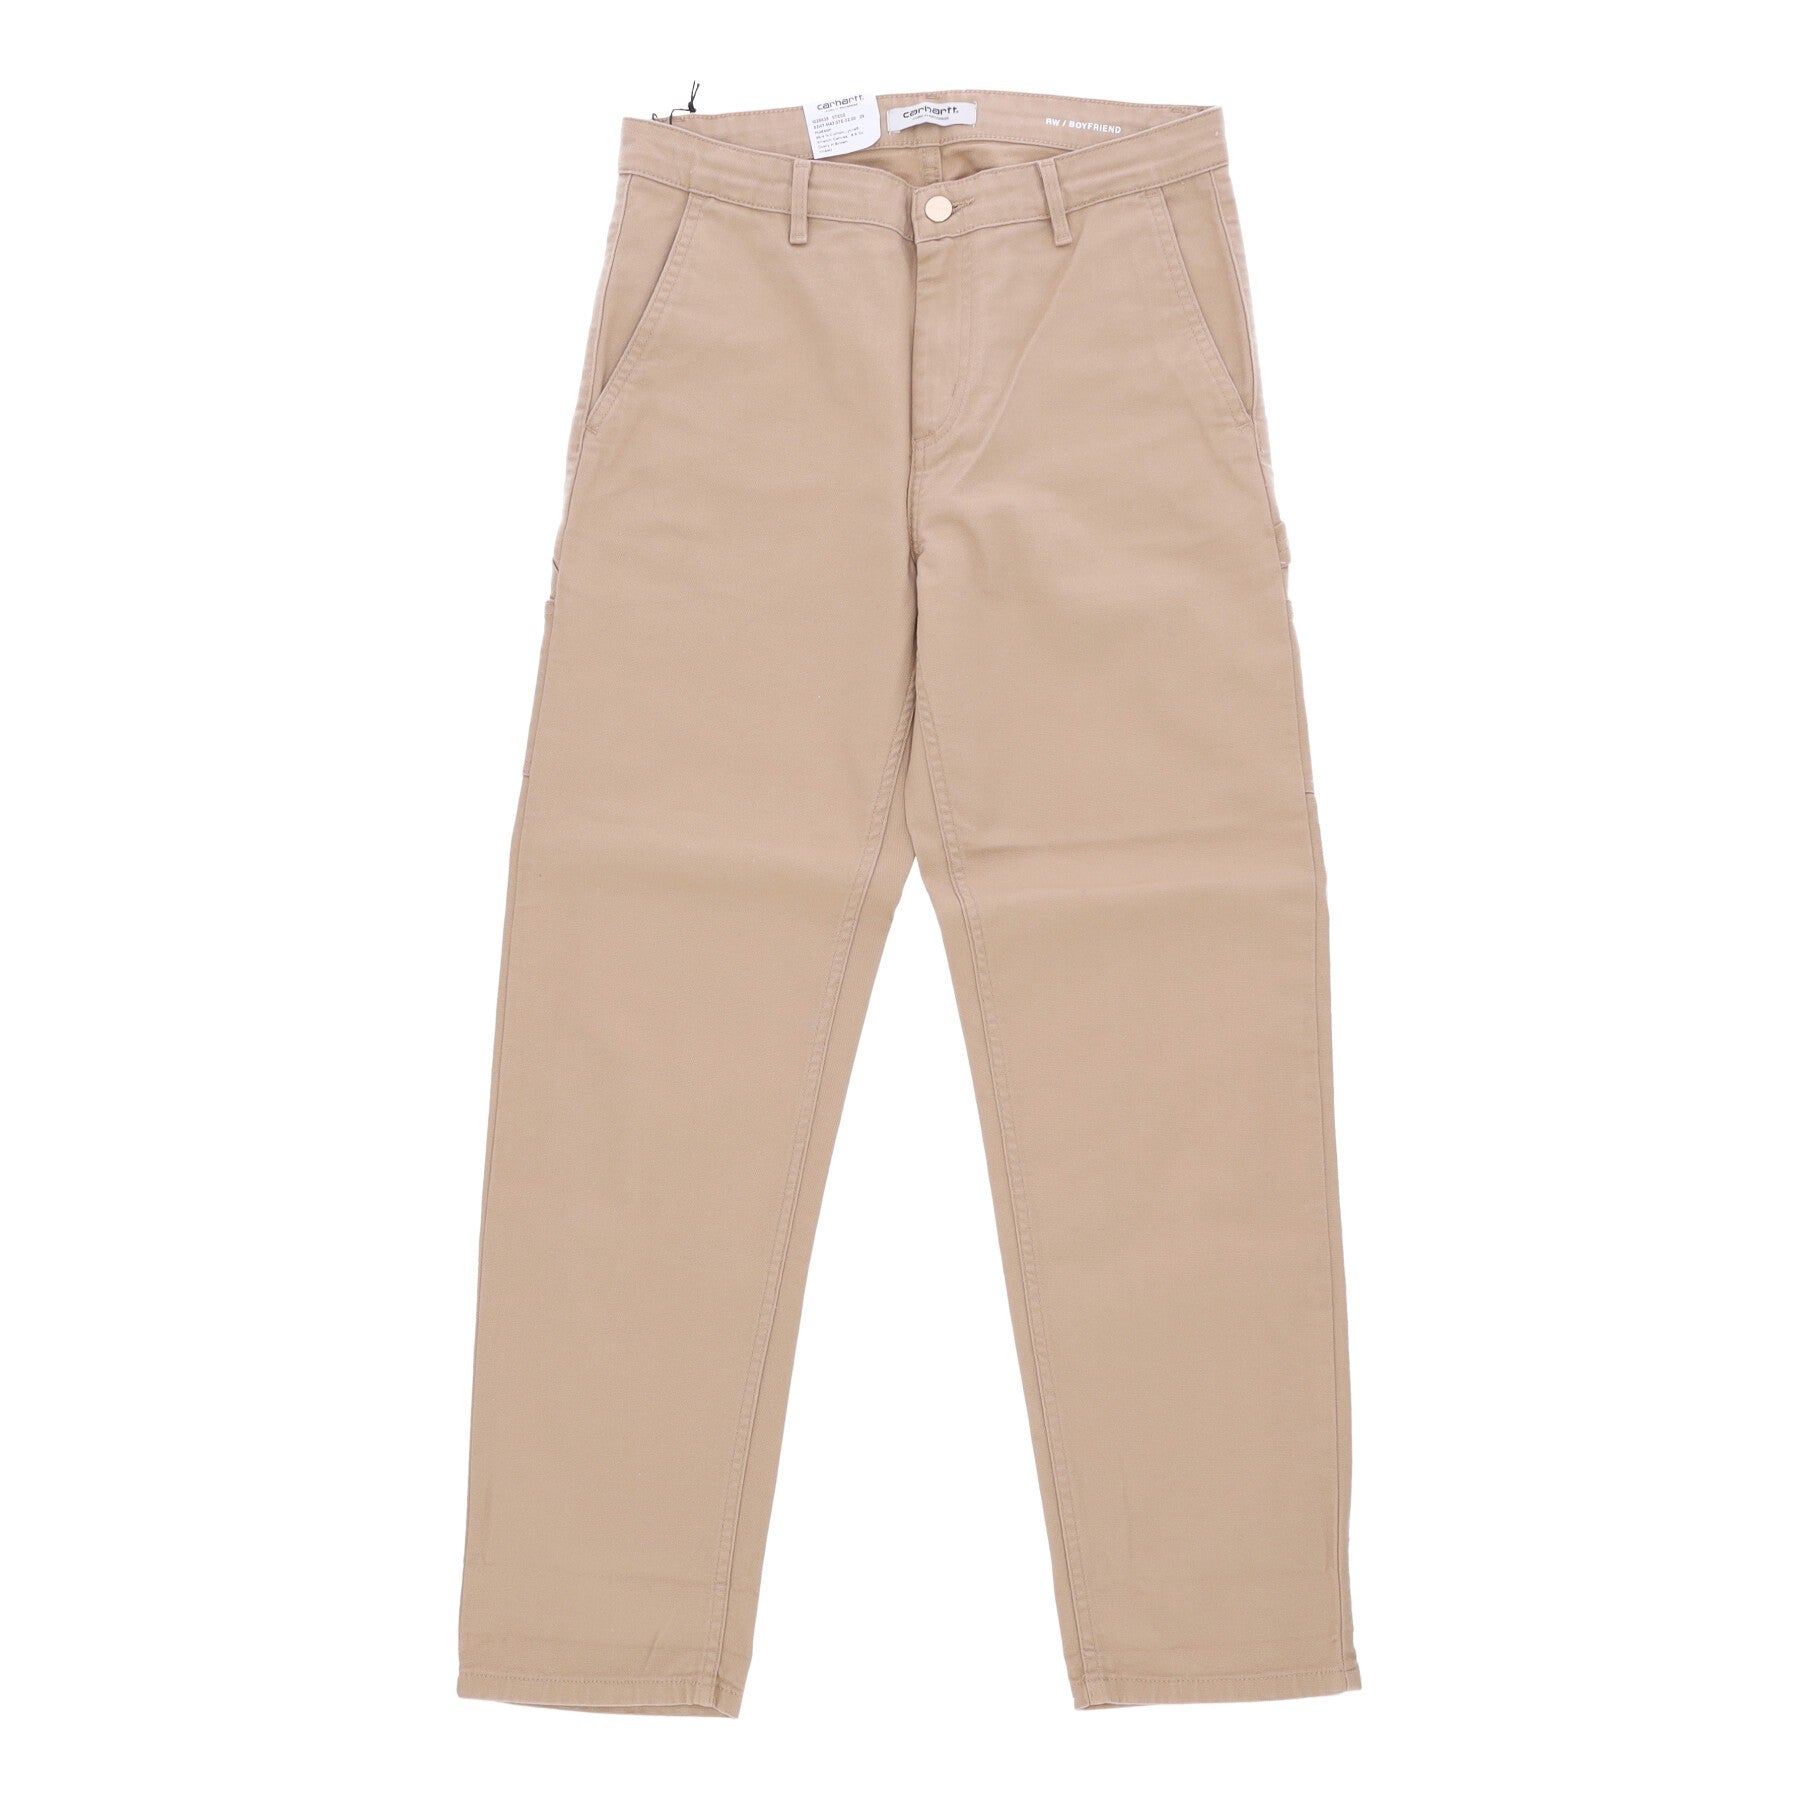 Carhartt Wip, Pantalone Lungo Donna Pierce Pant, Dusty H Brown Rinsed